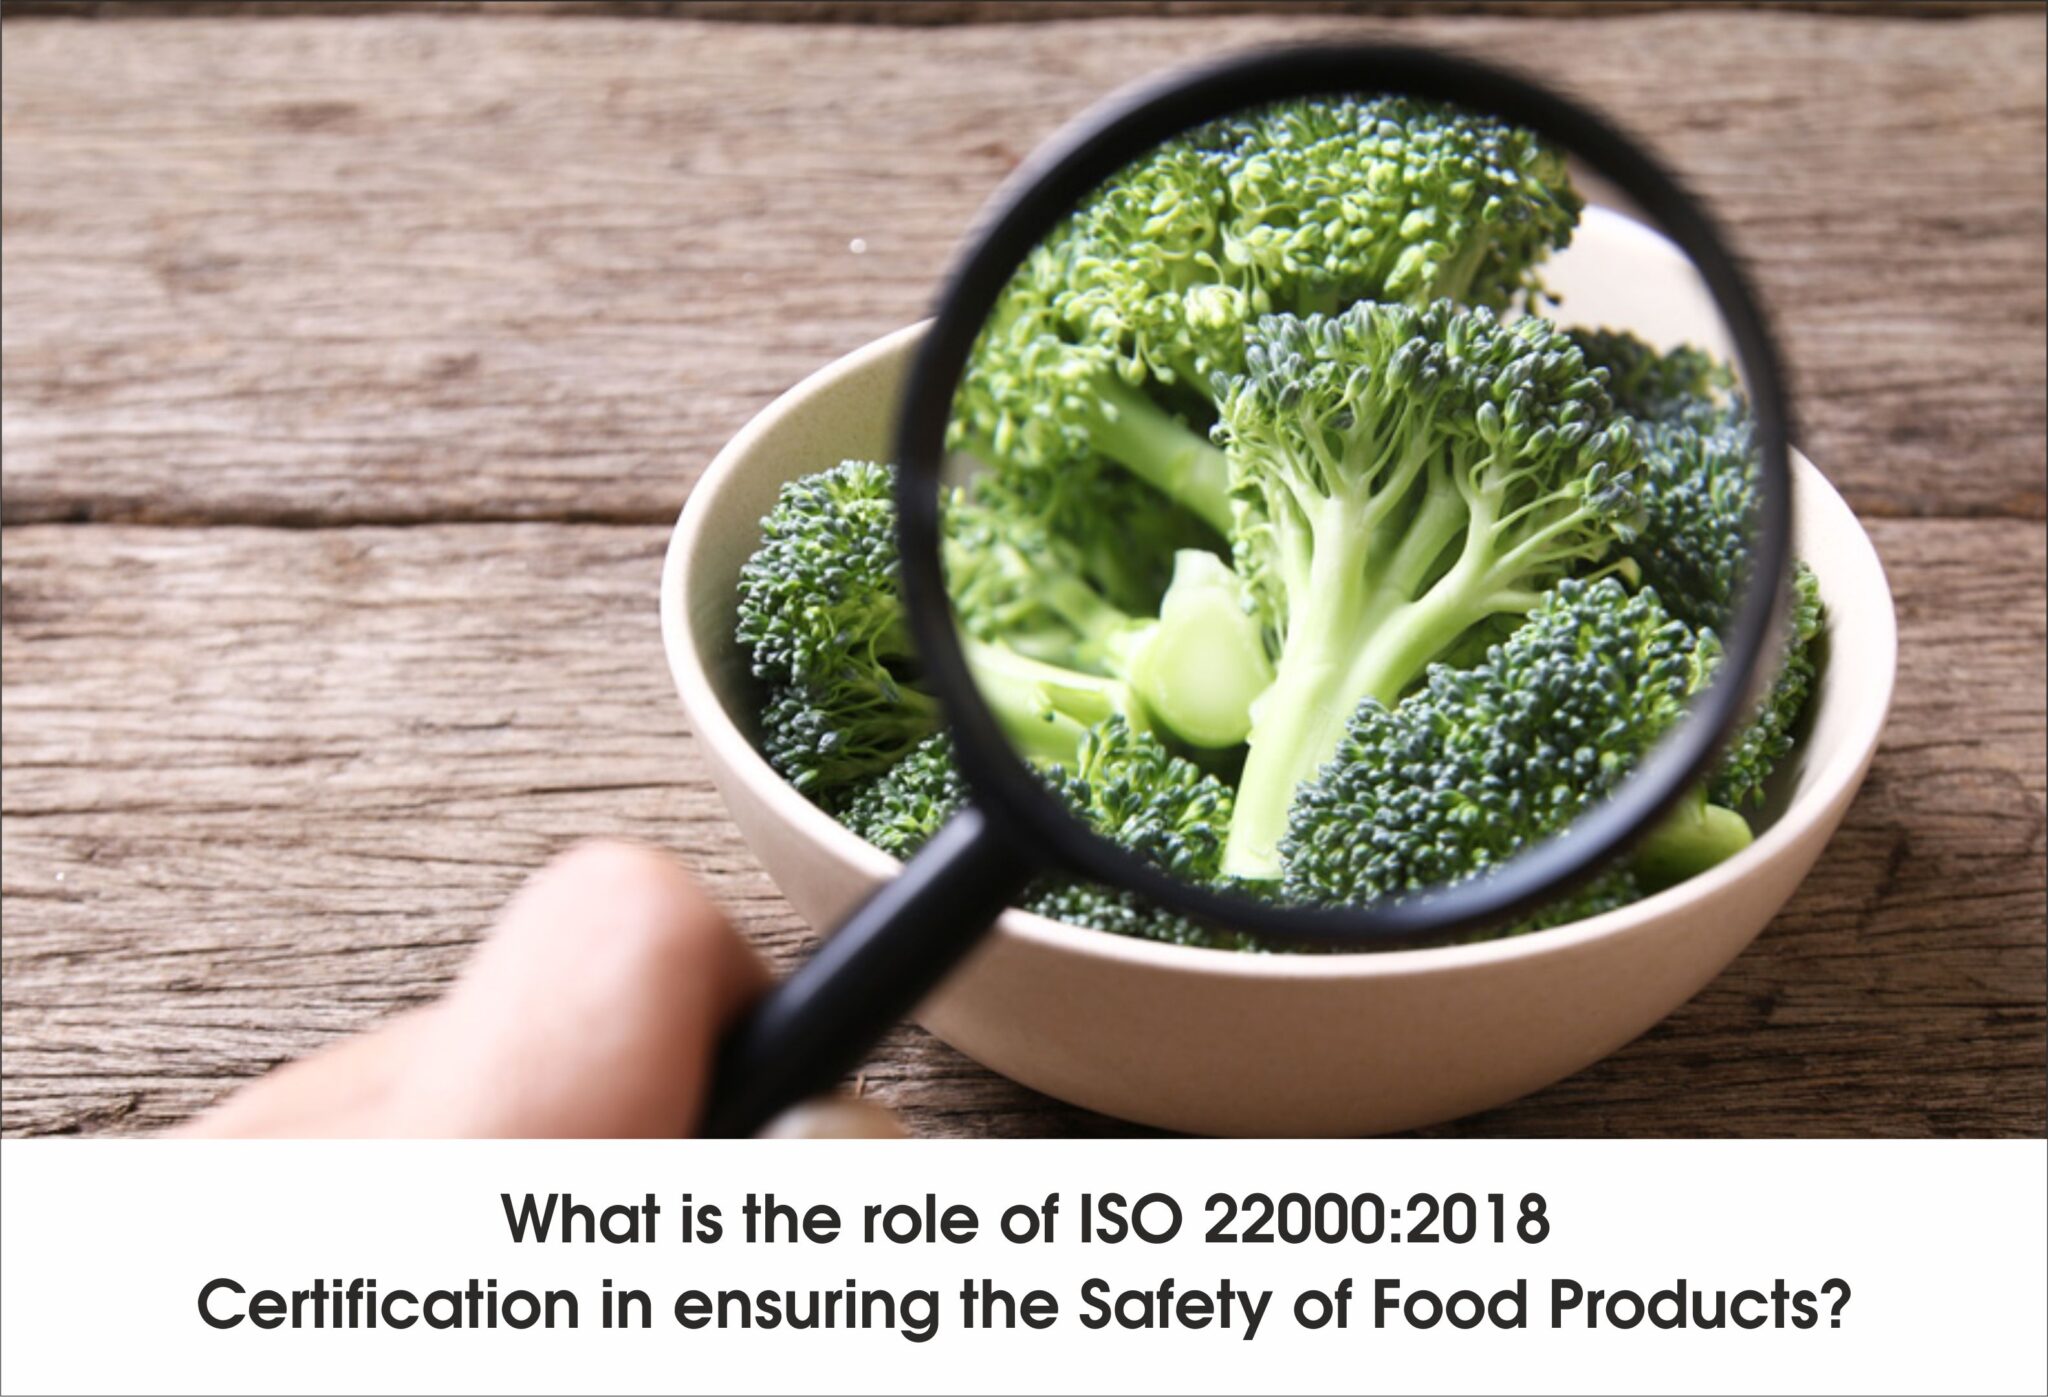 What is the role of ISO 22000:2018 Certification in ensuring the Safety of Food Products?